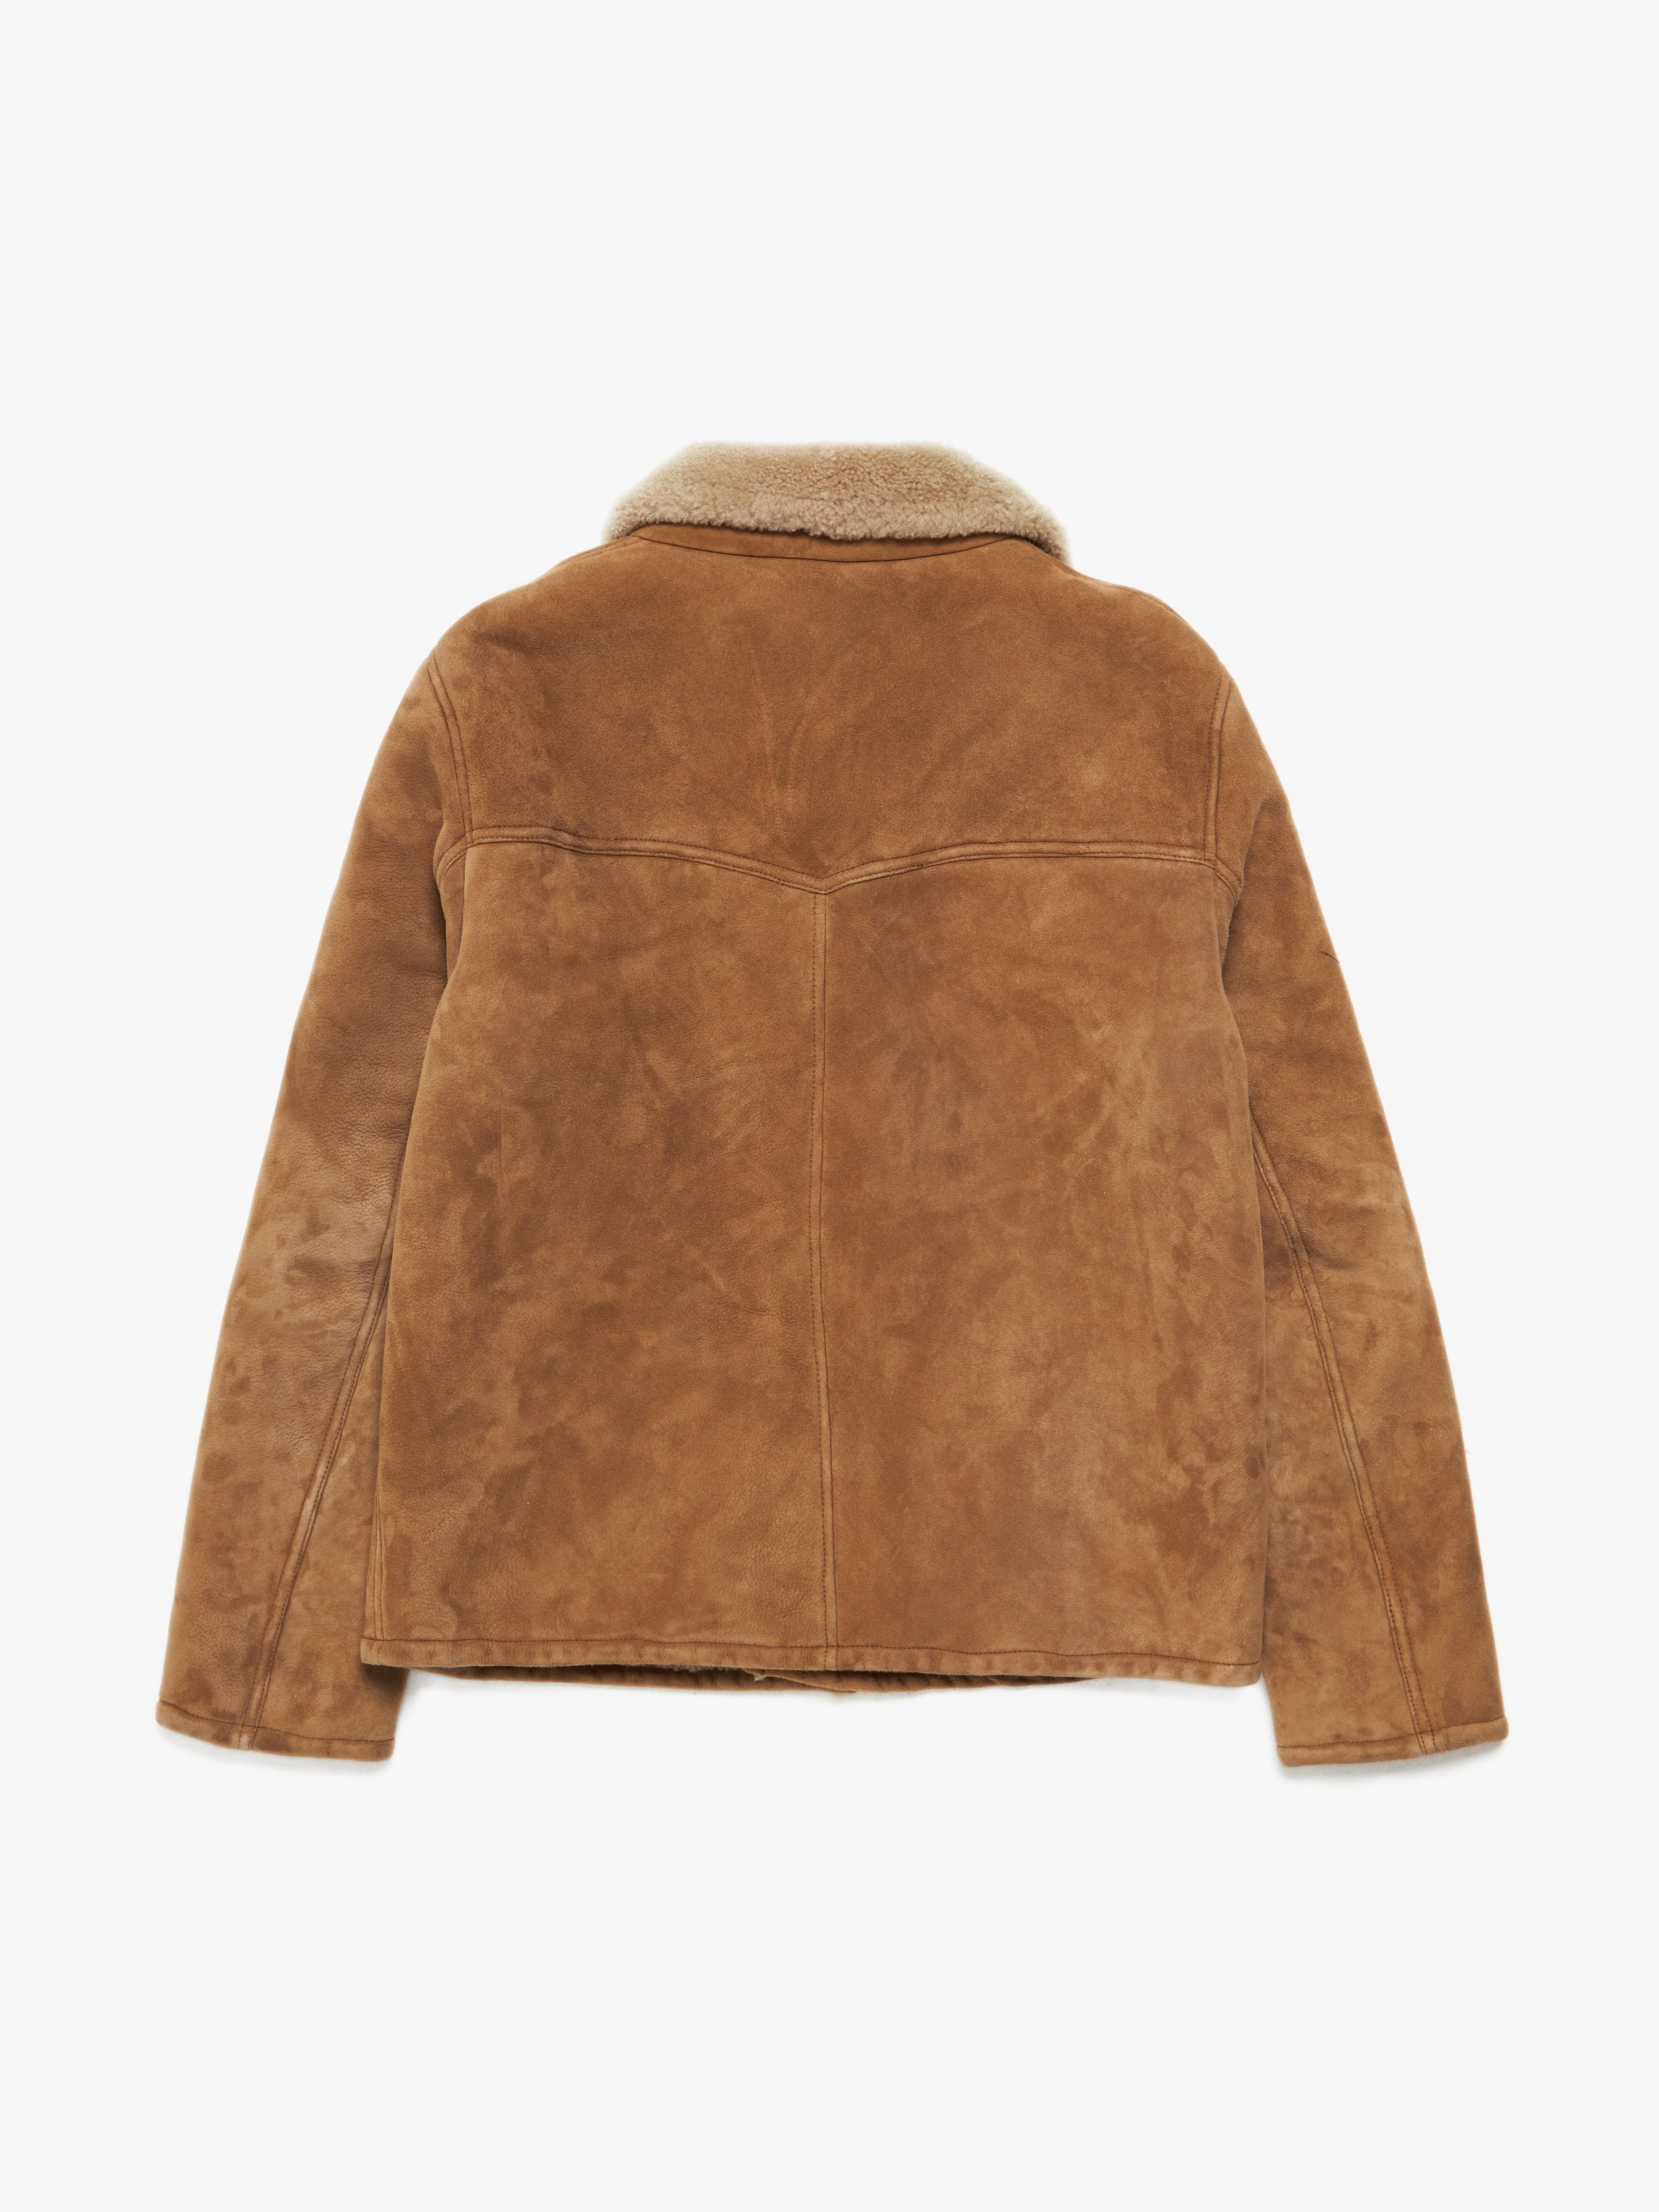 Saint Laurent Paris  Buttons Sheepskin Coat
Size marked: 54
Condition: Gently used
Material: 100% Leather / 100% Shearling
Measurements: Shoulder to shoulder (cm) 44/ pit to pit (cm) 50/ Length (cm) 63/ sleeve (cm) 66/ 
(112015)